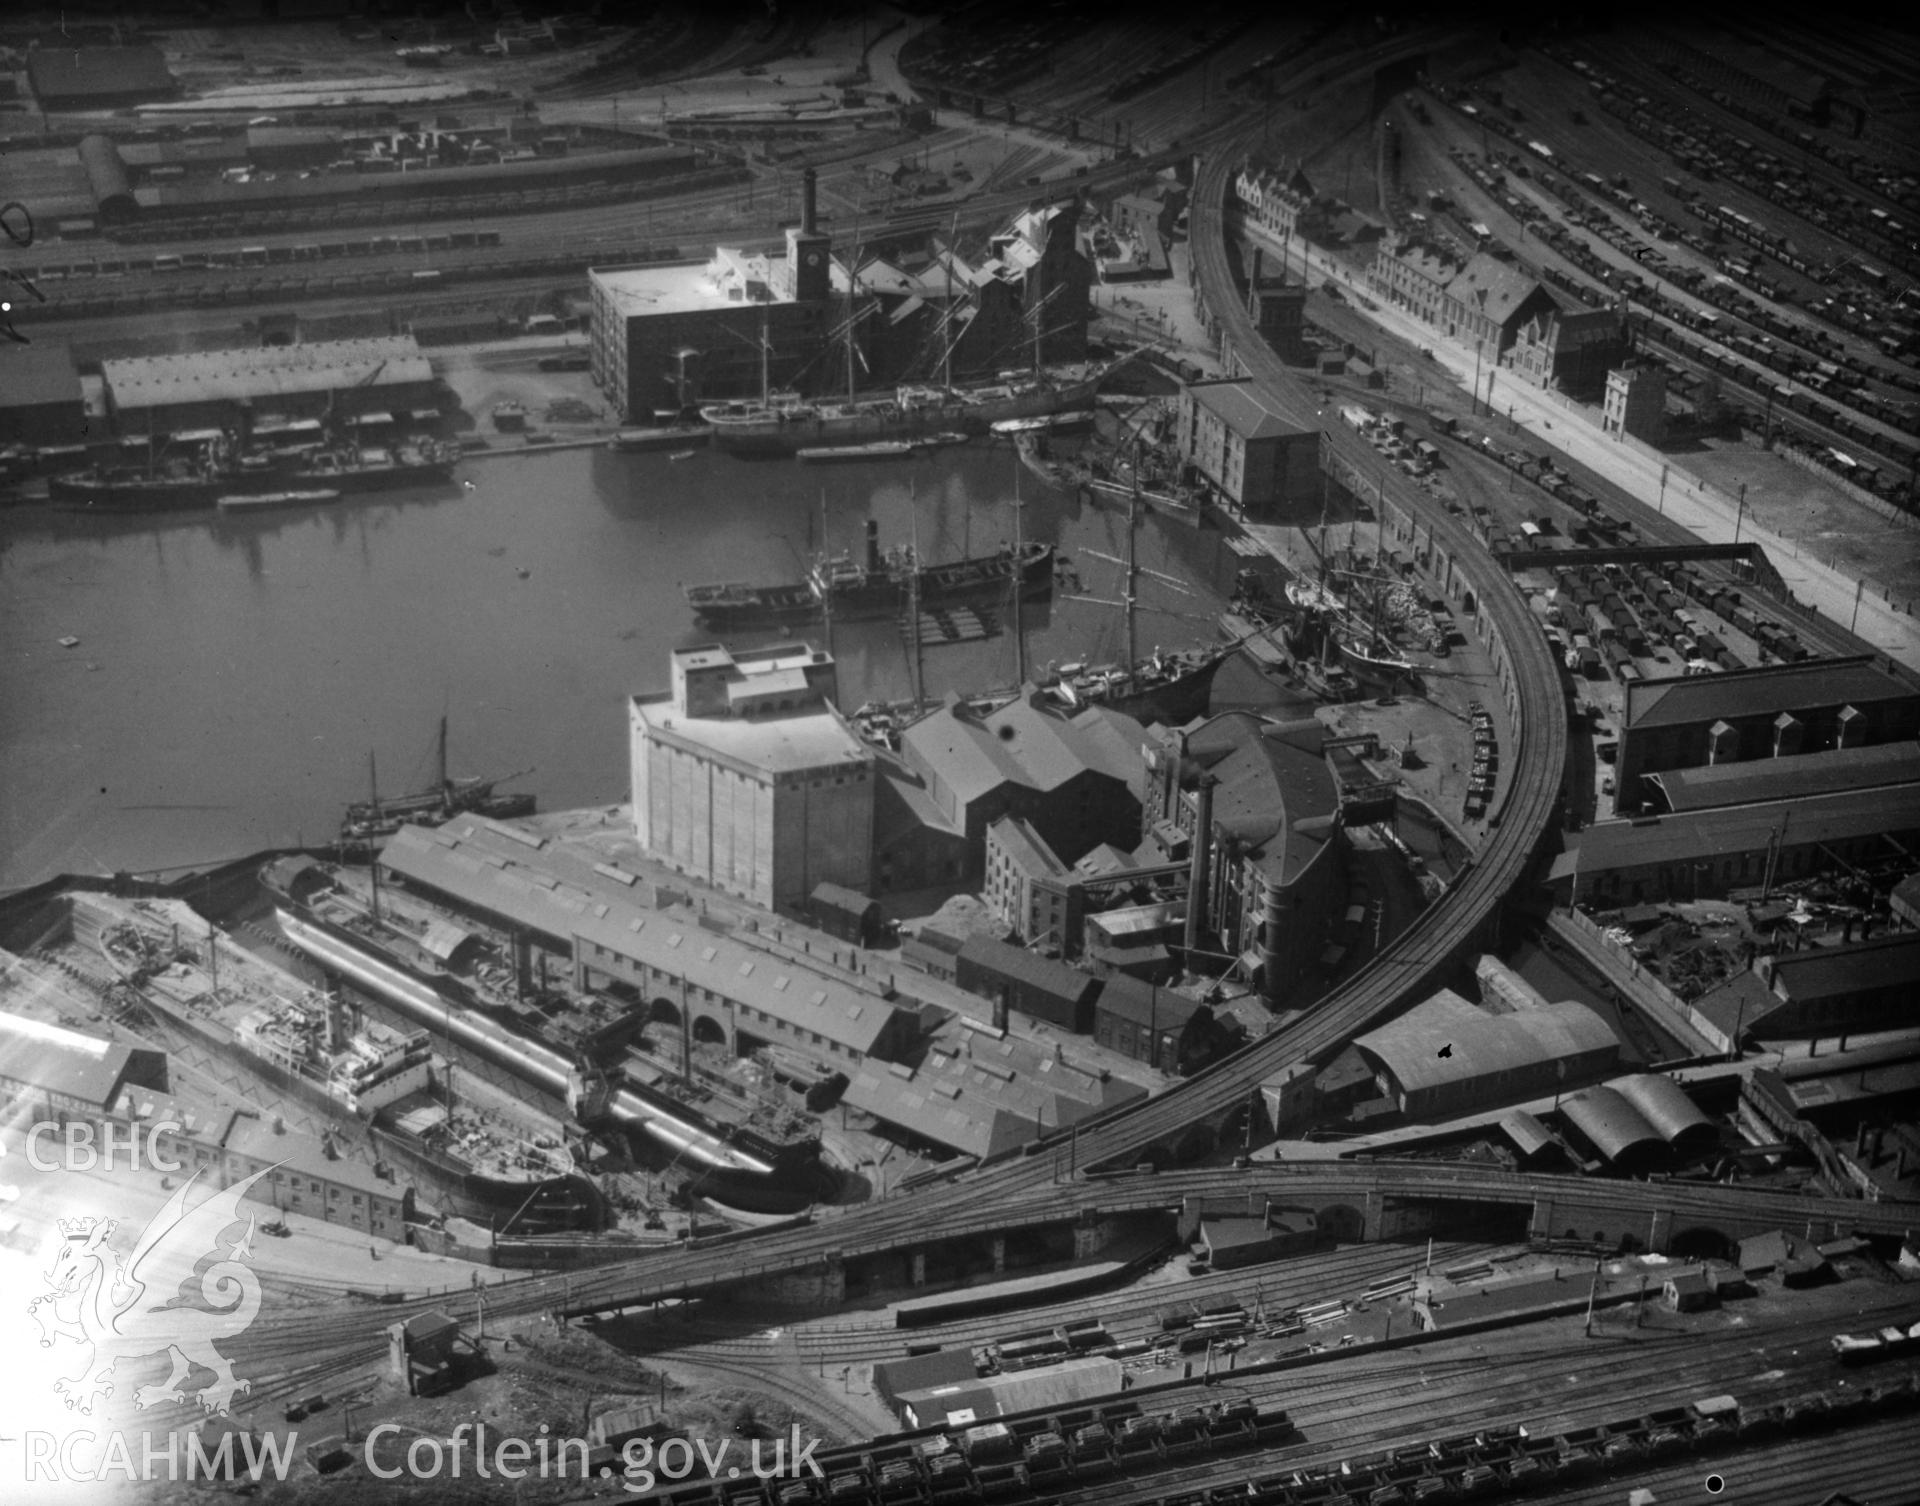 View of Spillers Biscuit Factory, Bute East Dock, Cardiff, oblique aerial view. 5?x4? black and white glass plate negative.